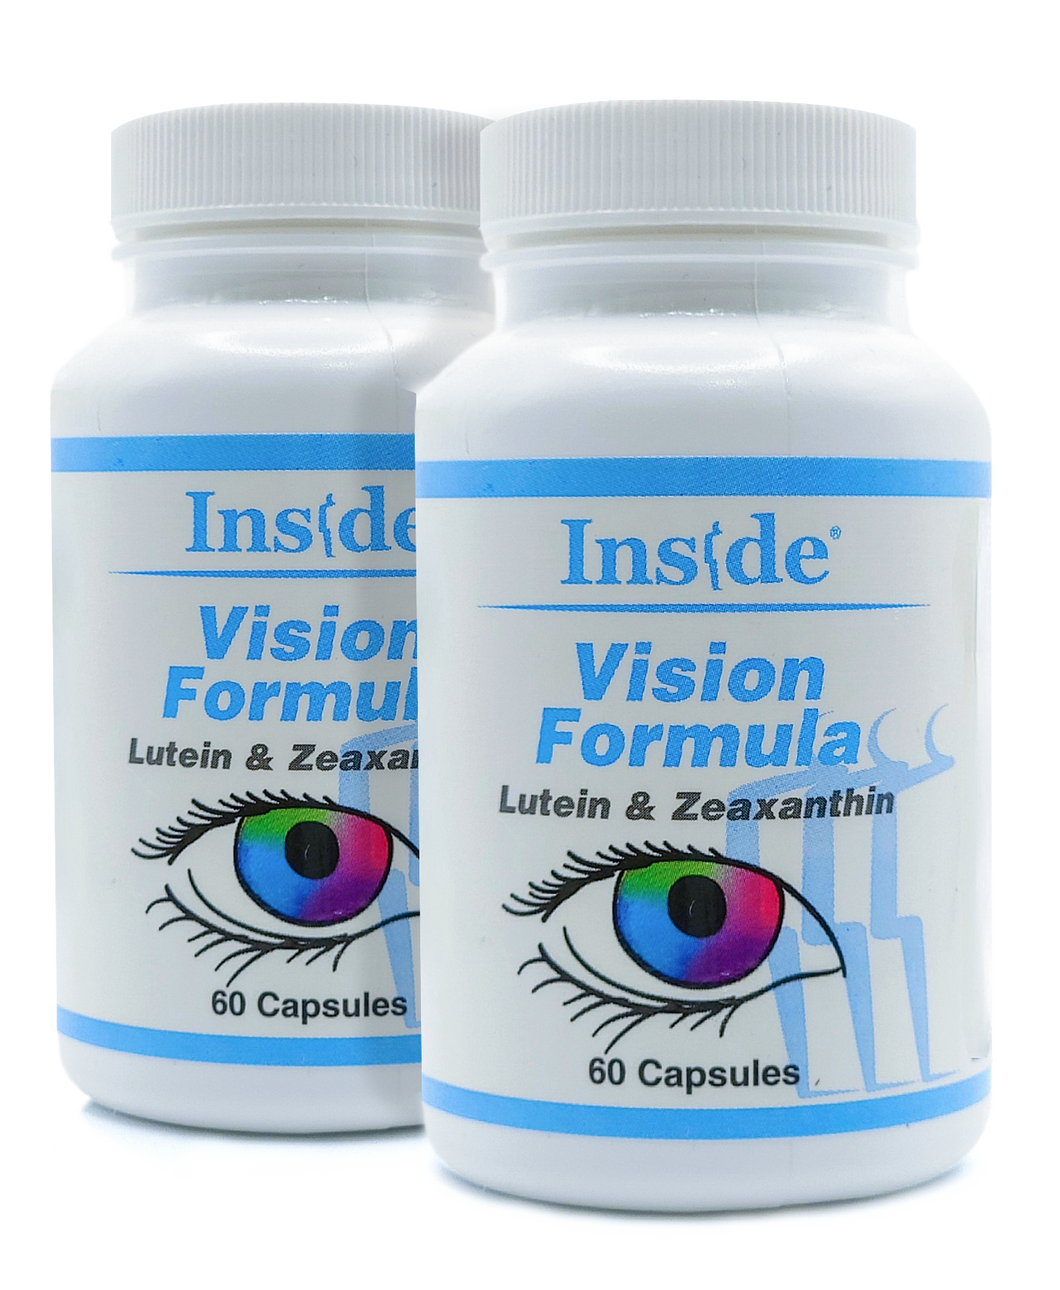 Inside Pharma-Grade Vision Formula Capsules with Lutein/Zeaxanthin (2 Pack) 120 Capsules (20% off) 14 cents per Capsule! Buy more and save...see our 4 pack!  Expiration 2025!